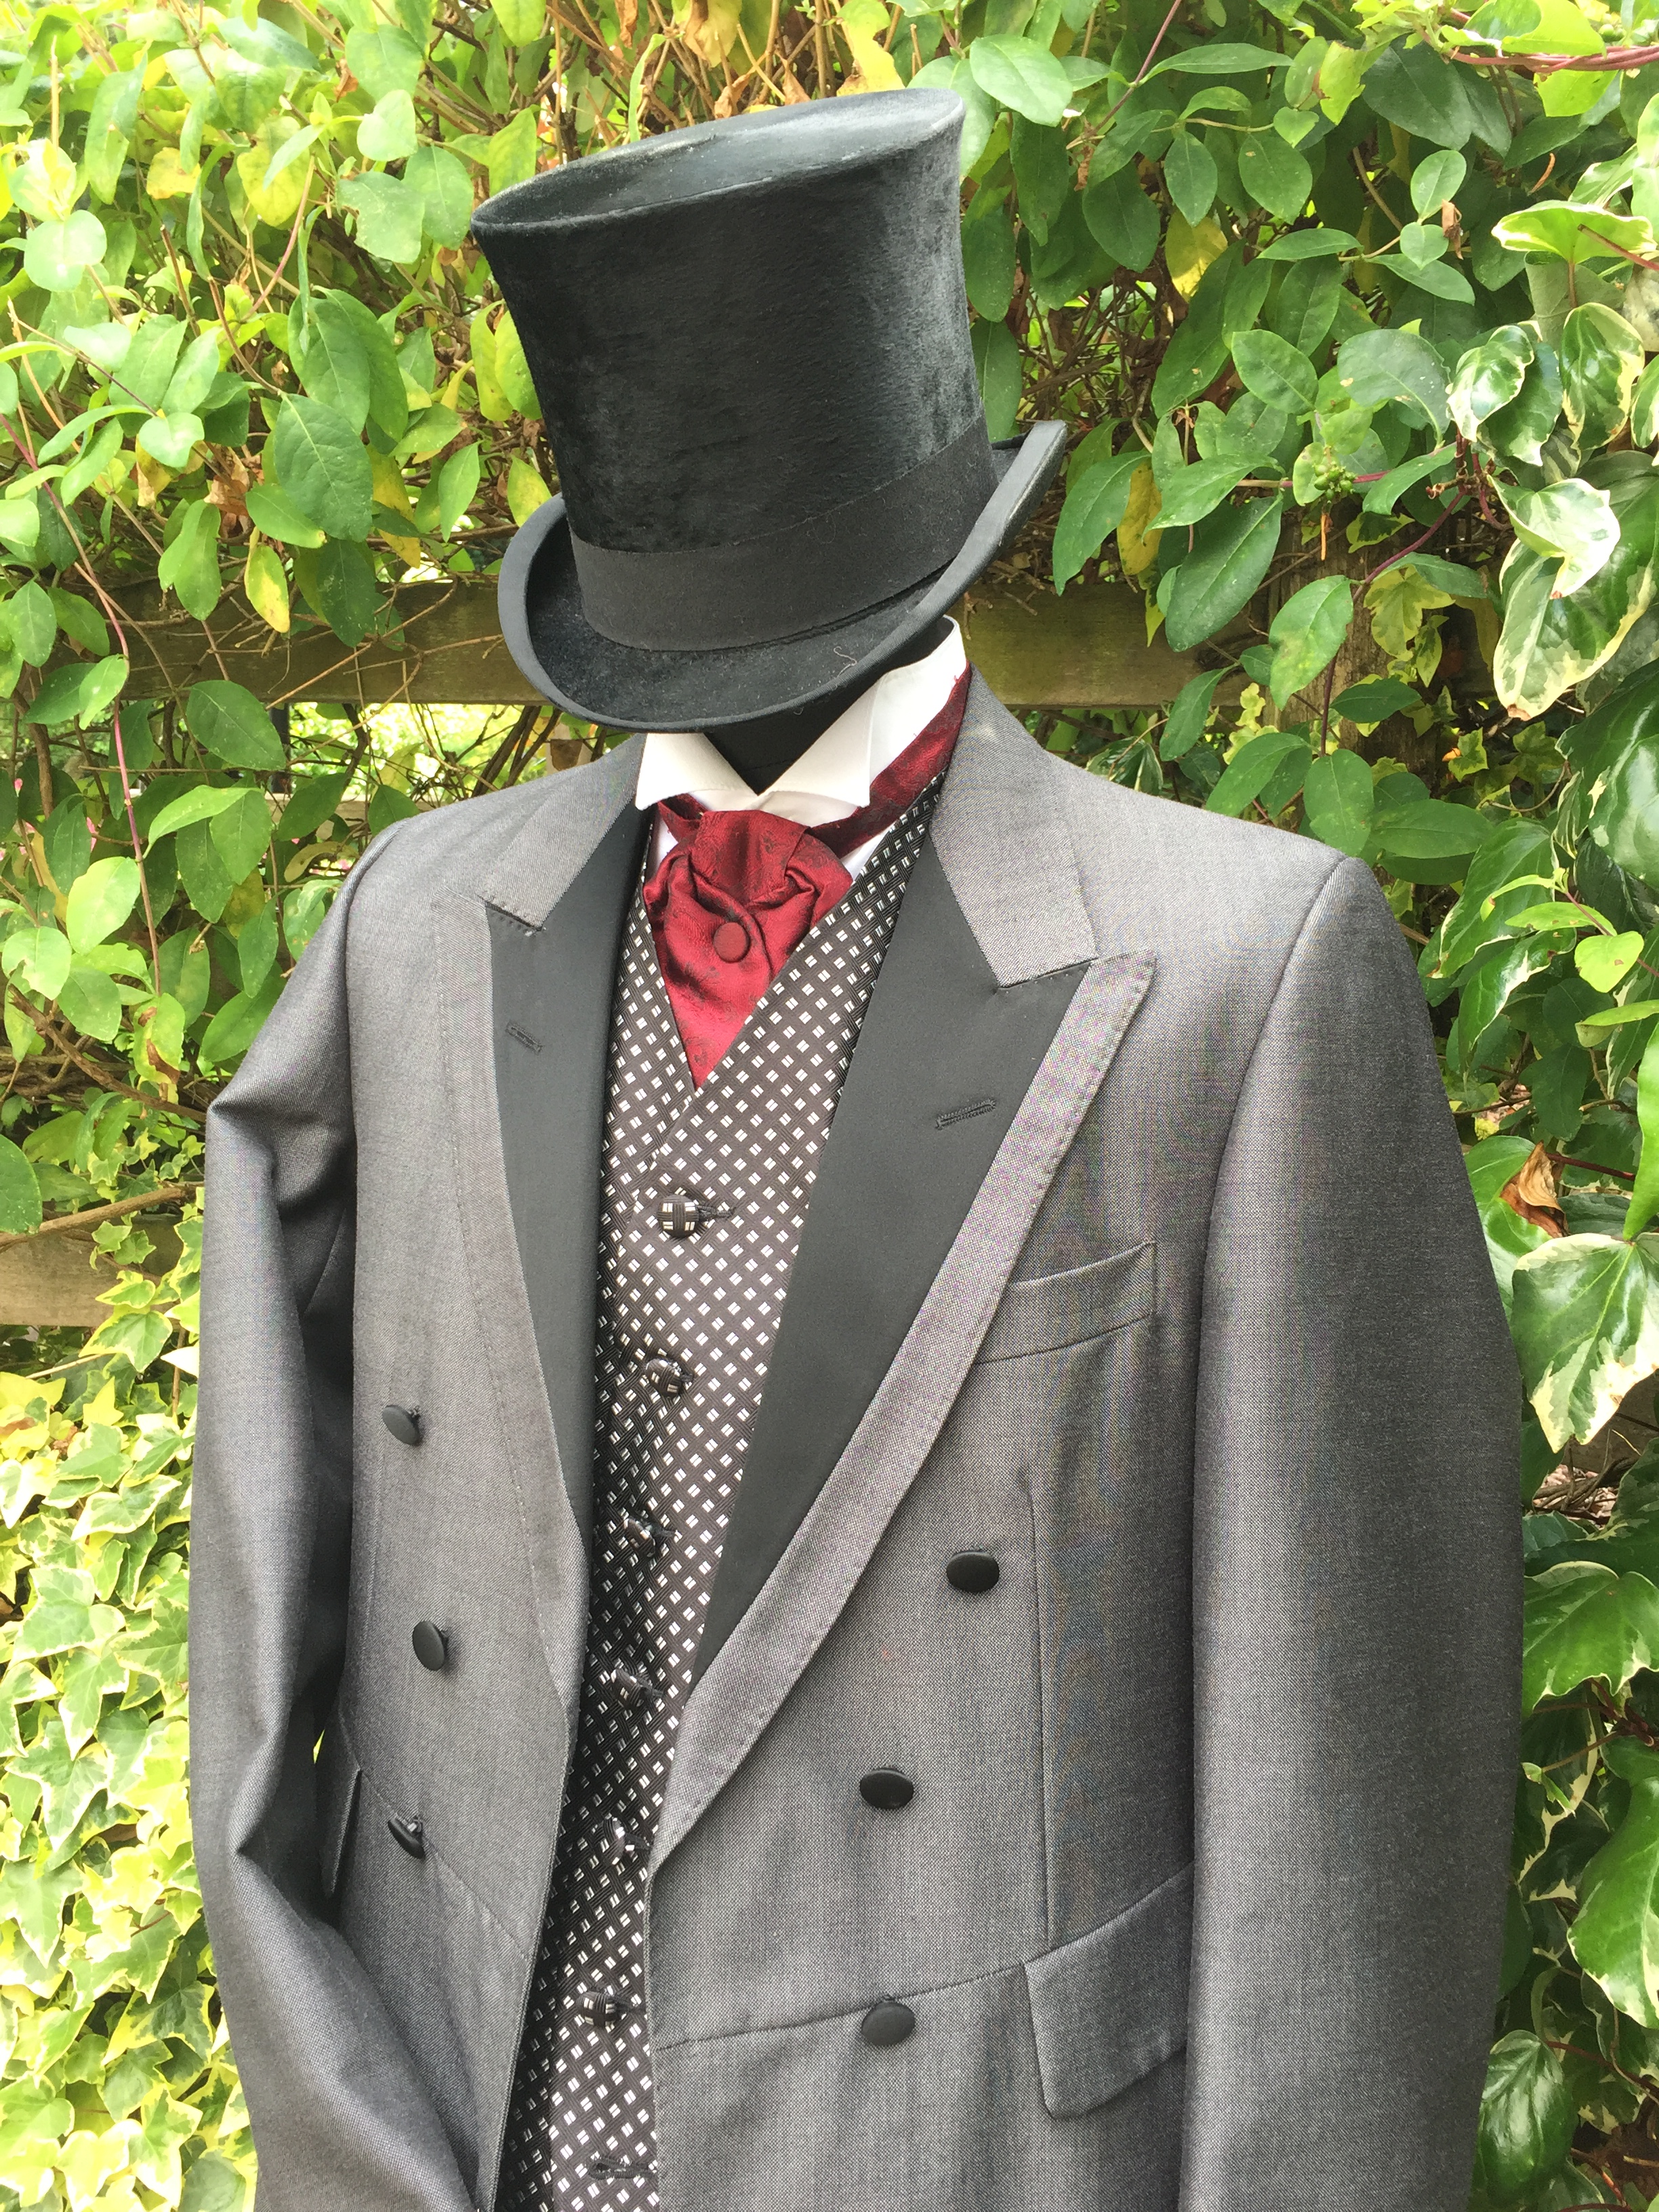 Classic Frock Coat by Magnoli Clothiers